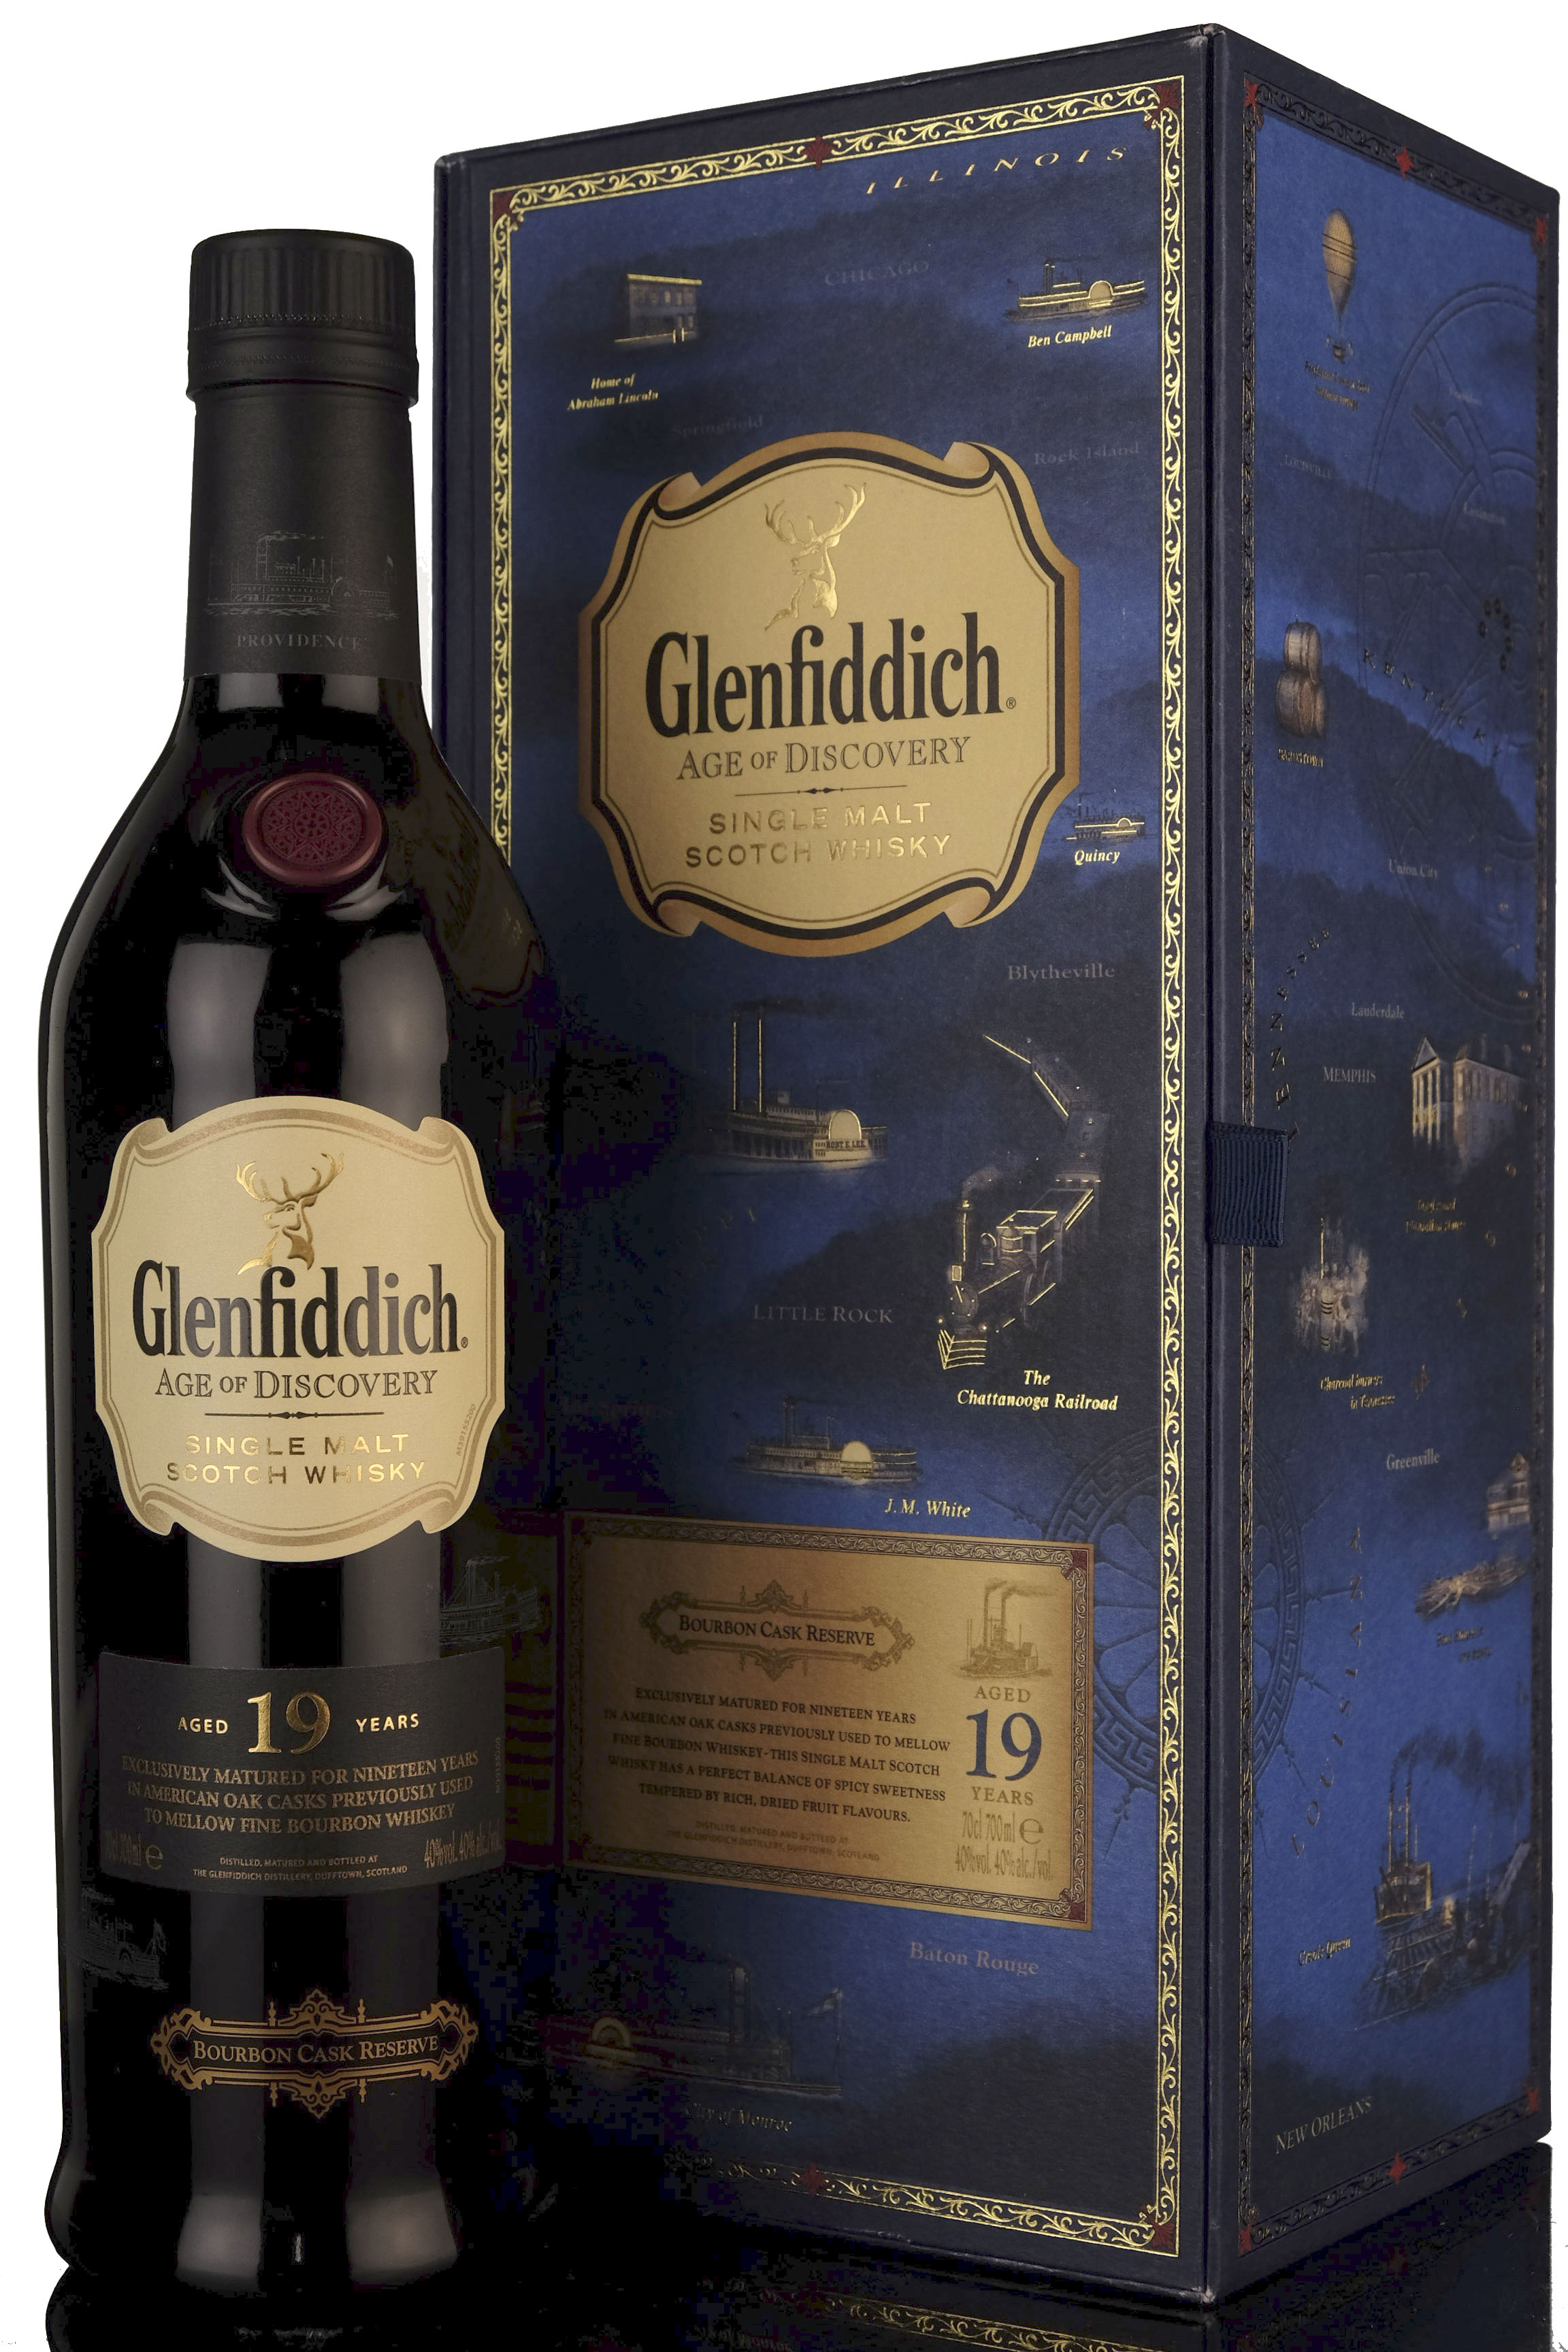 Glenfiddich 19 Year Old - Age Of Discovery - Bourbon Cask Finish